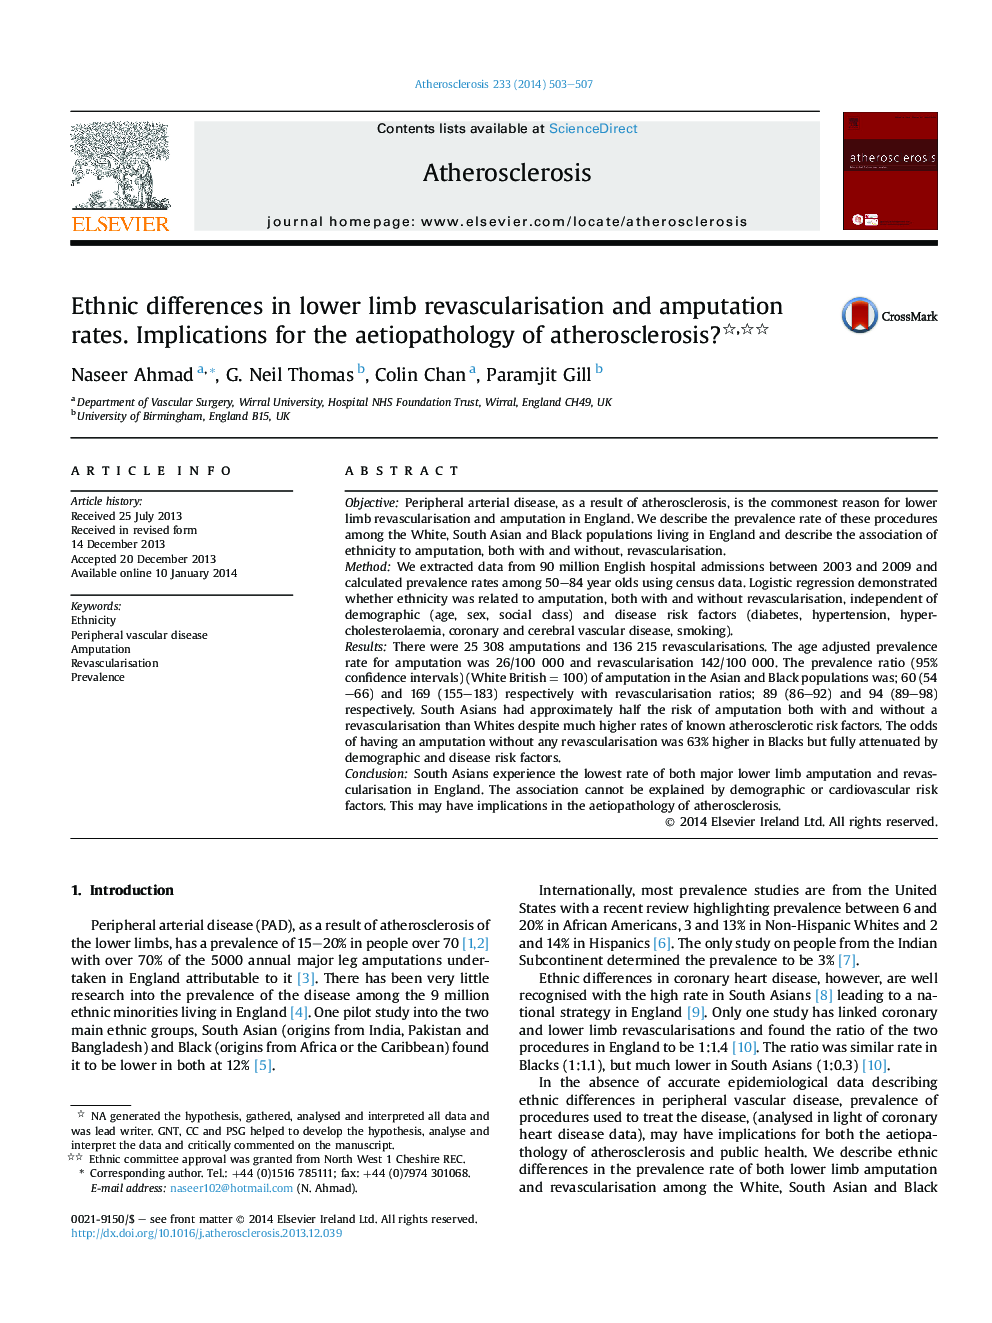 Ethnic differences in lower limb revascularisation and amputation rates. Implications for the aetiopathology of atherosclerosis?